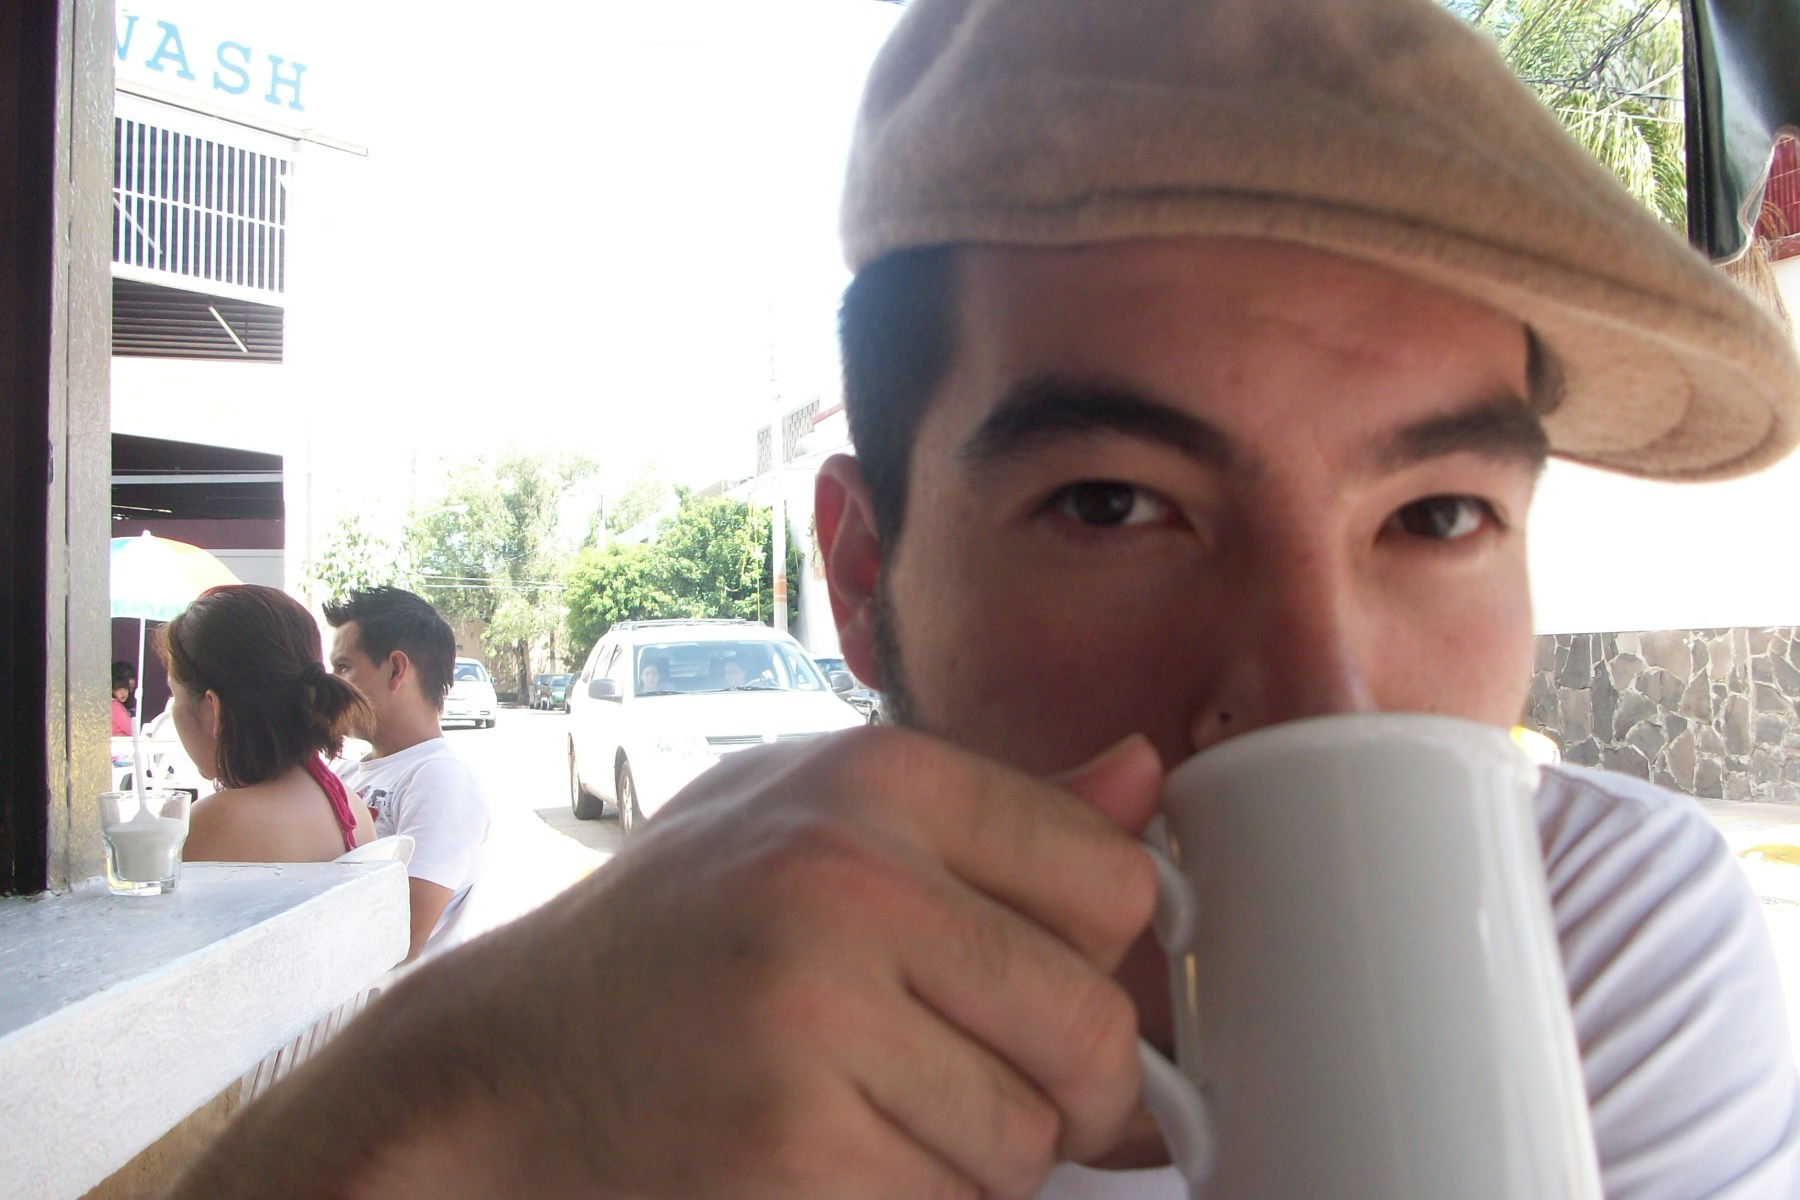 a man drinking a cup outside with a group of people behind him